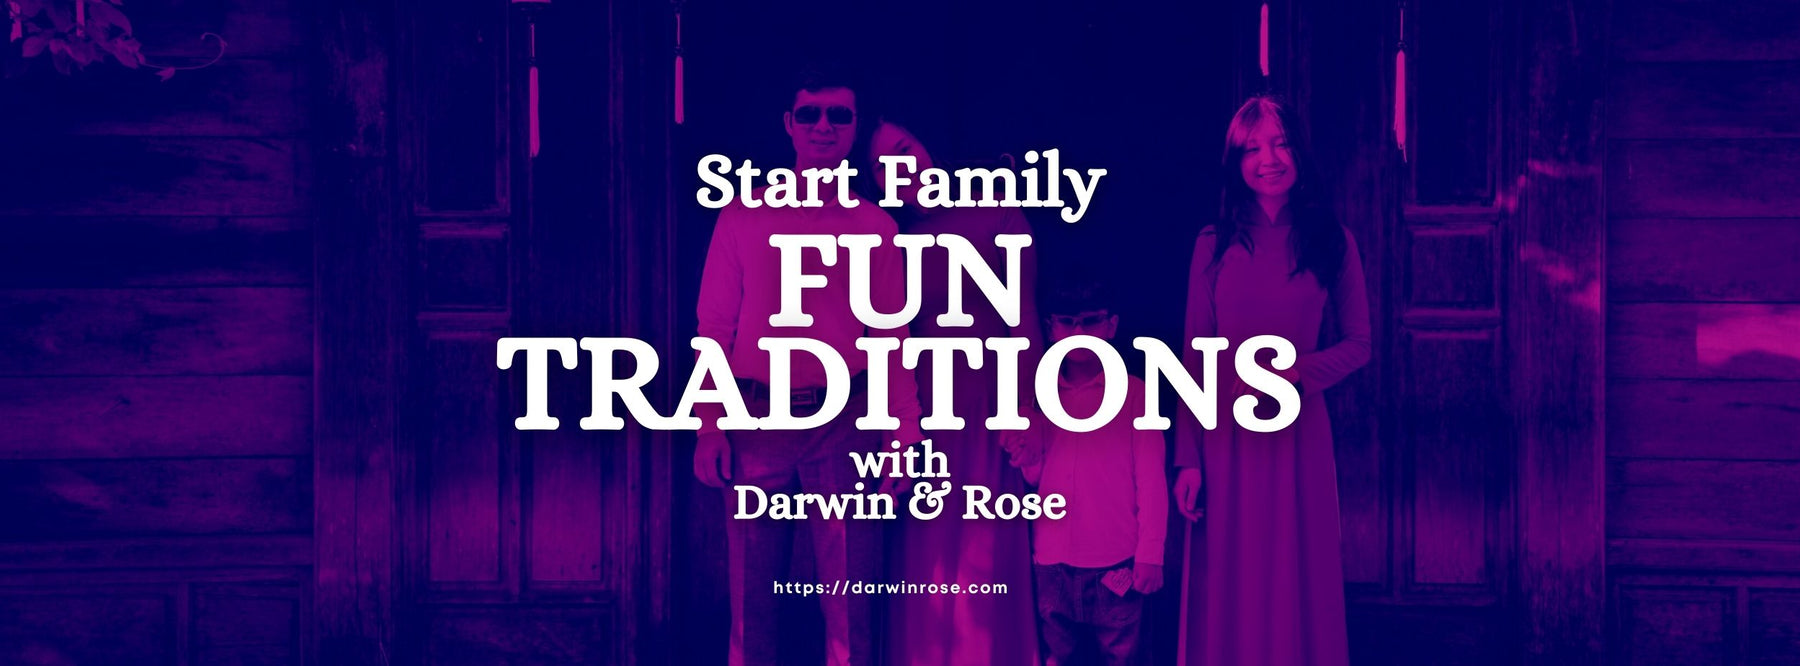 Start Family Fun Traditions with Darwin & Rose Pillowcases – Shop Now!